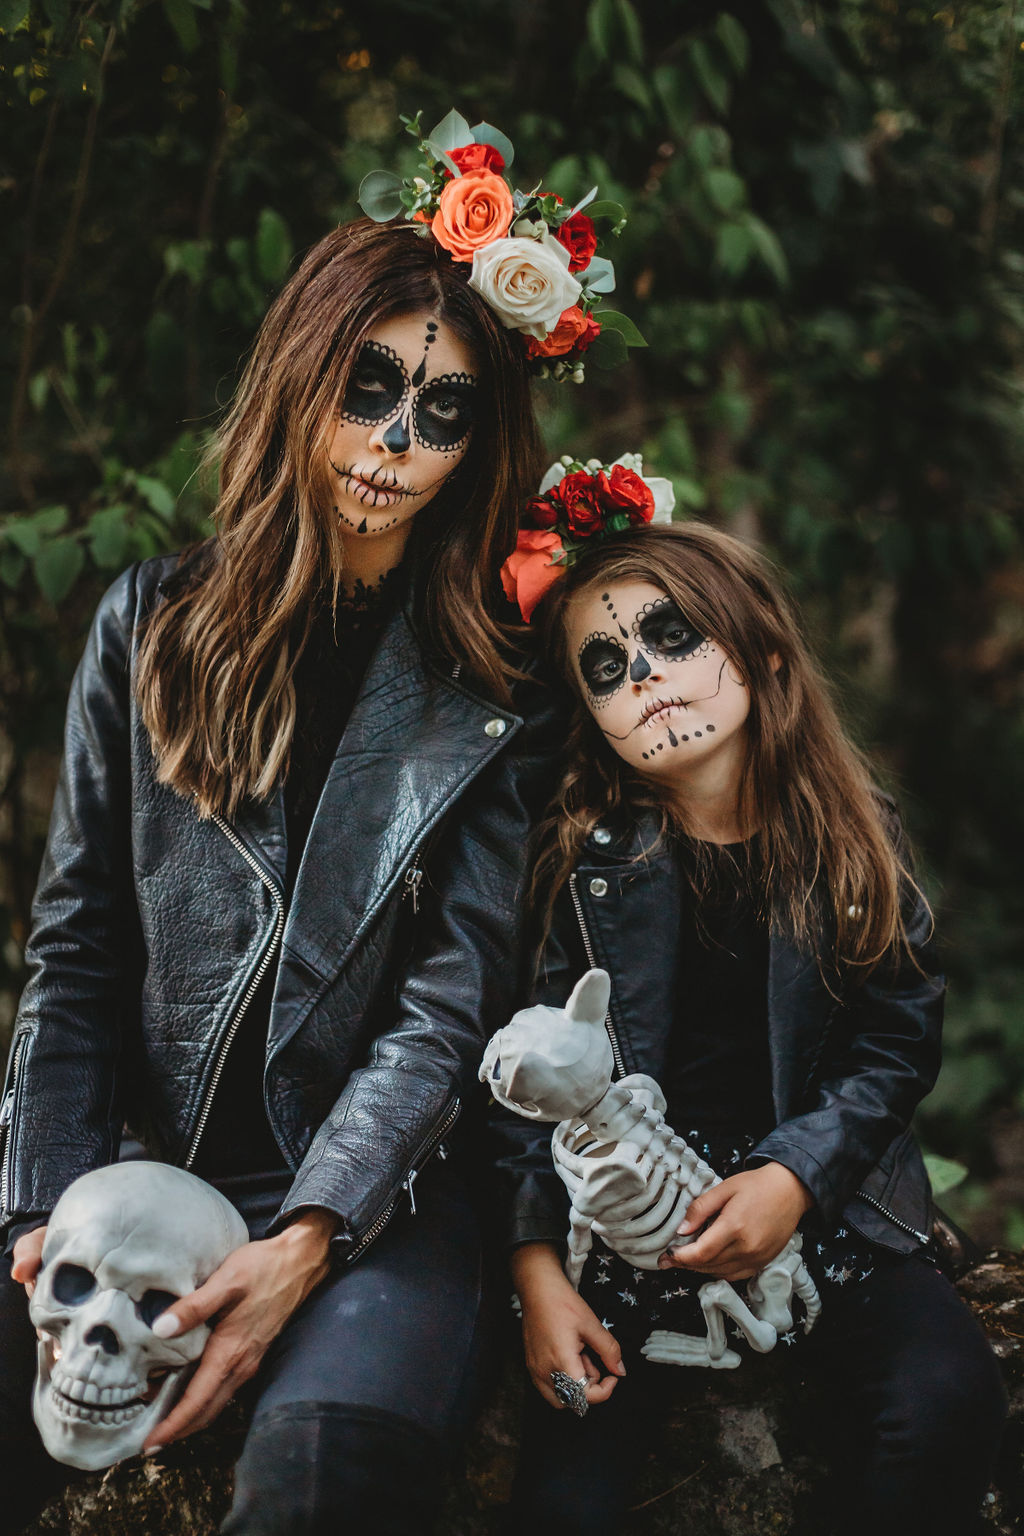 Halloween Sugar Skull Makeup by popular San Francisco beauty blog, The Girl in the Yellow Dress: image of a mom and daughter with Halloween sugar skull makeup and wearing a Gap Toddler Faux-Leather Biker Jacket, Nordstrom Tucker + Tate 'Core' Leggings, Target Cat + Jack Toddler Girls' Unity Fashion Boots, Oldnavy Crew-Neck Long-Sleeve Tee for Toddler Girls, DOMIRY Tulle Tutu Skirt for Little Girls Layered Sparkle Star Princess Ballet Dance Dress Puffy Skirt, Nordstrom BLANKNYC Tonal Star Faux Leather Moto Jacket, Nordstrom Steve Madden Jacey Over the Knee Boot, Nordstrom TopShop Joni High Waist Jeans, and ShopBop WAYF Berklin Lace Top and holding a Target Hide and Eek! Boutique Chihuahua Skeleton Decorative Halloween Prop.